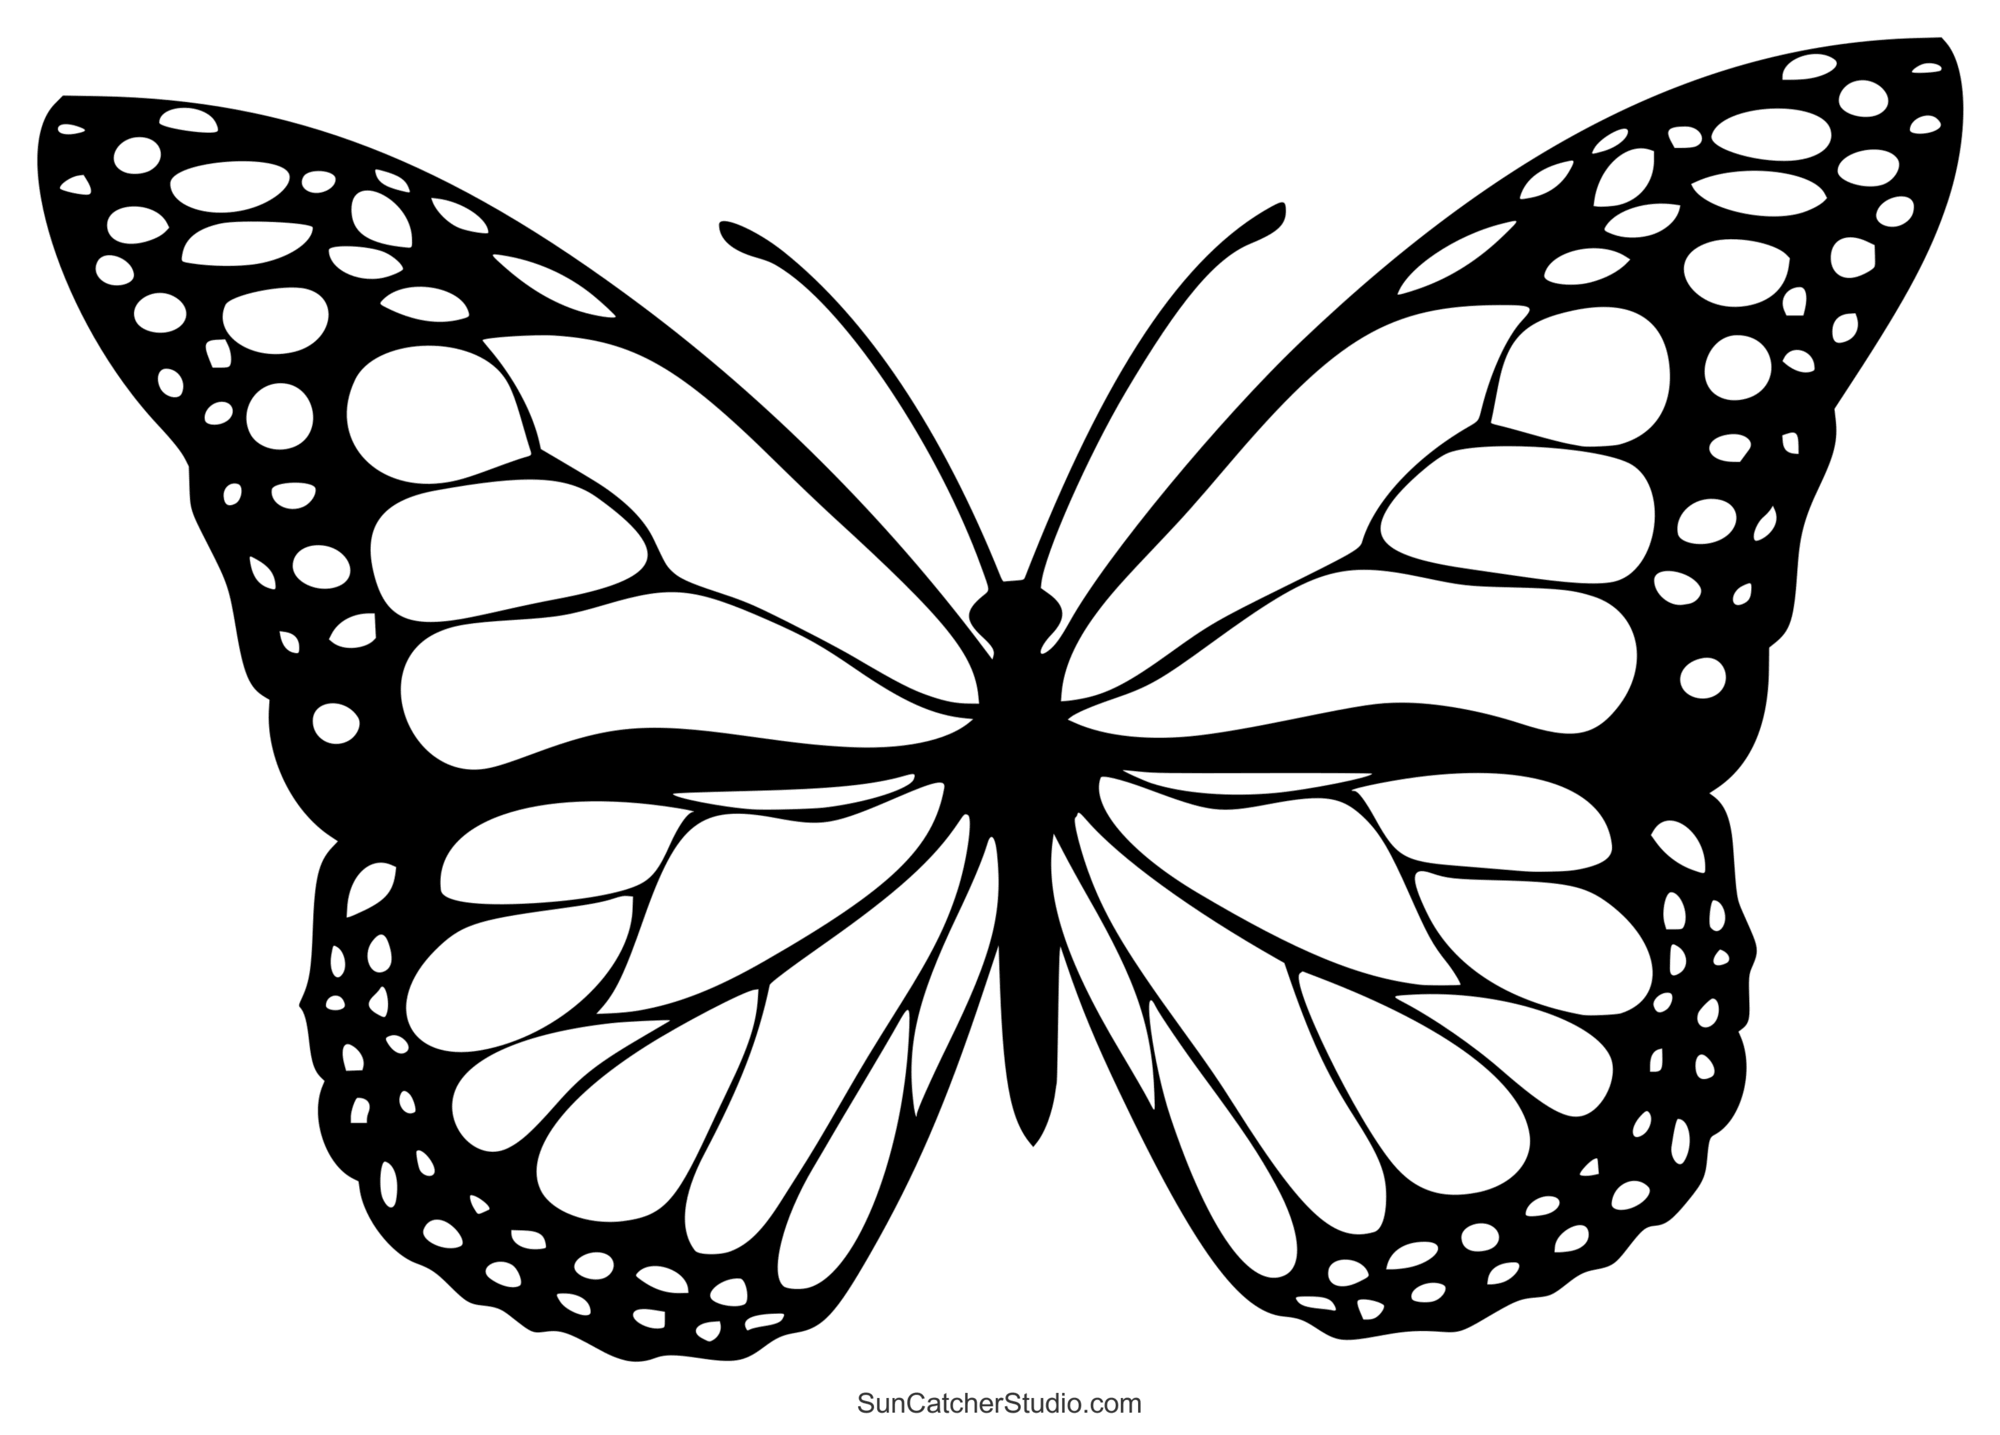 Butterfly SVG, Butterfly Stencil, Butterfly Printable Cut File, Cricut  Silhouette - Cut File, Print At Home